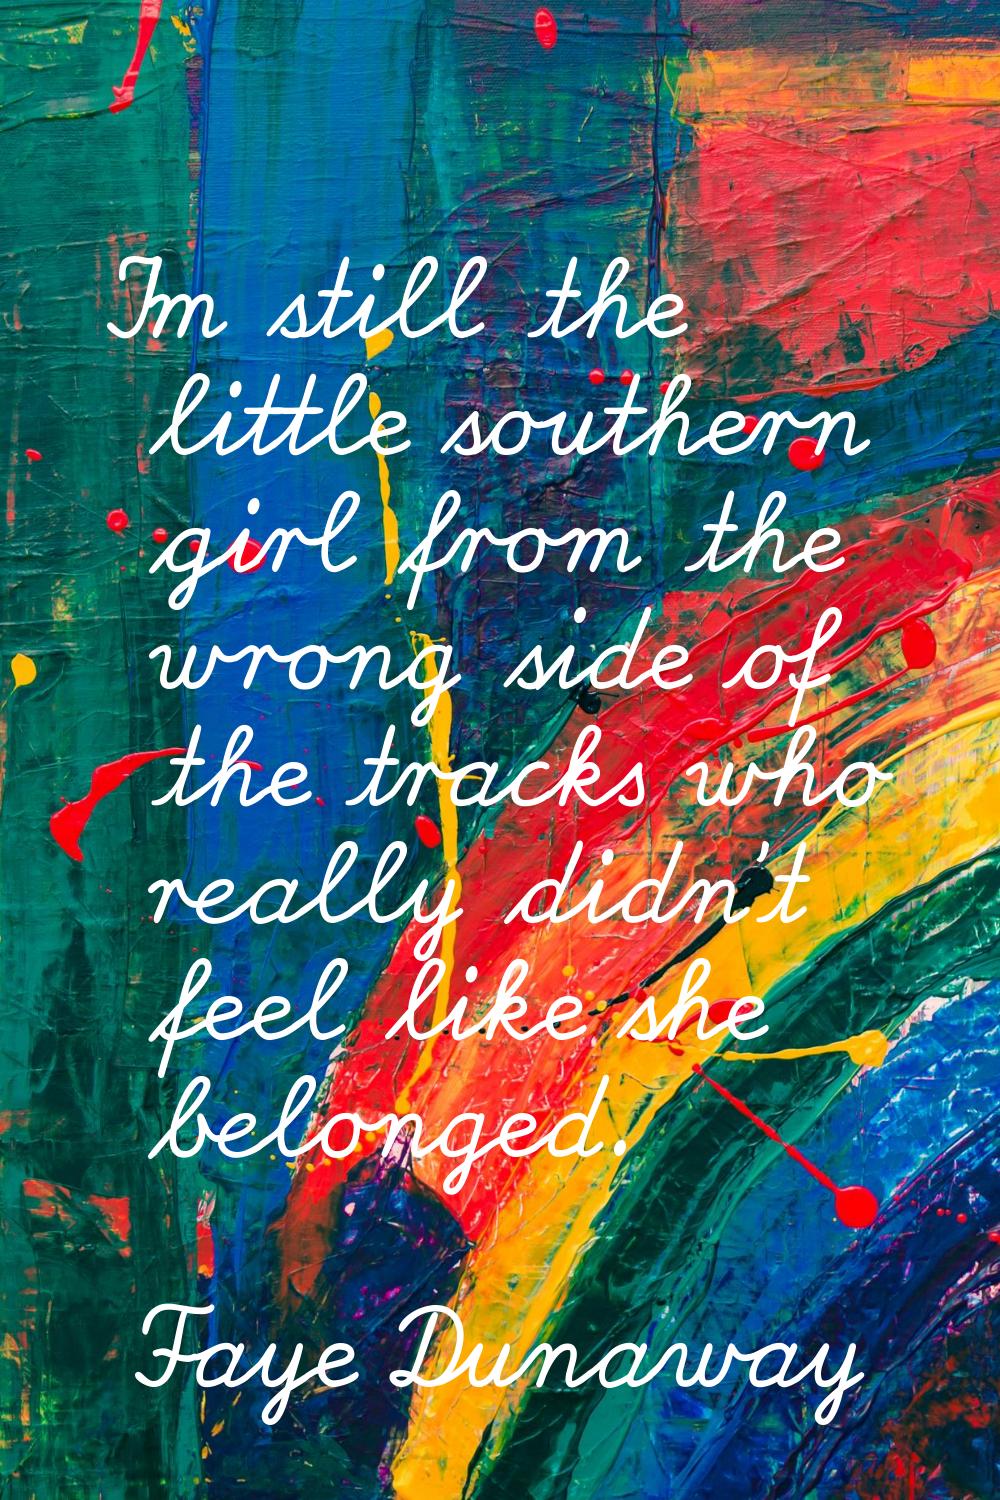 I'm still the little southern girl from the wrong side of the tracks who really didn't feel like sh